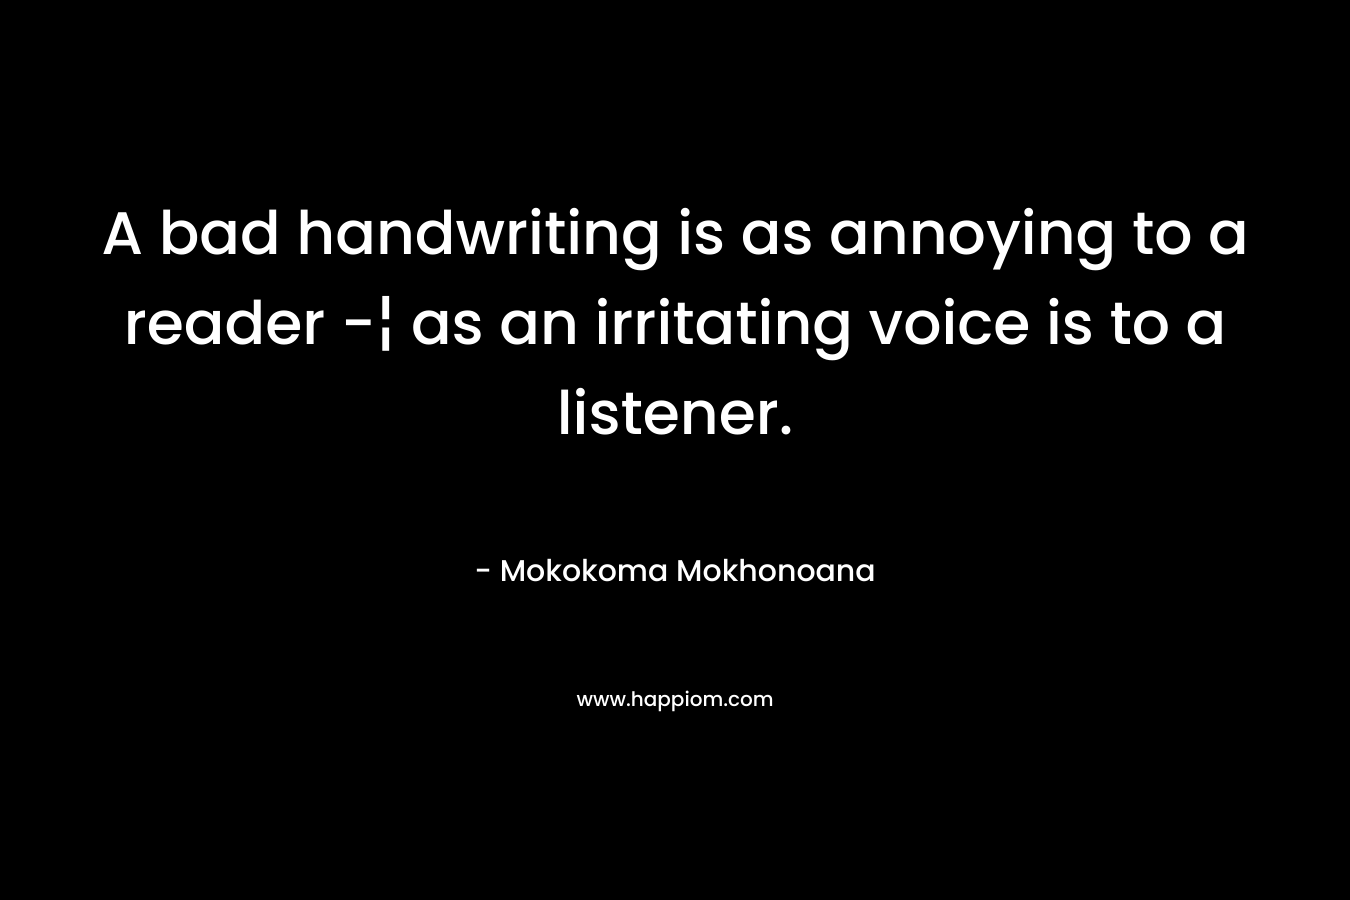 A bad handwriting is as annoying to a reader -¦ as an irritating voice is to a listener.